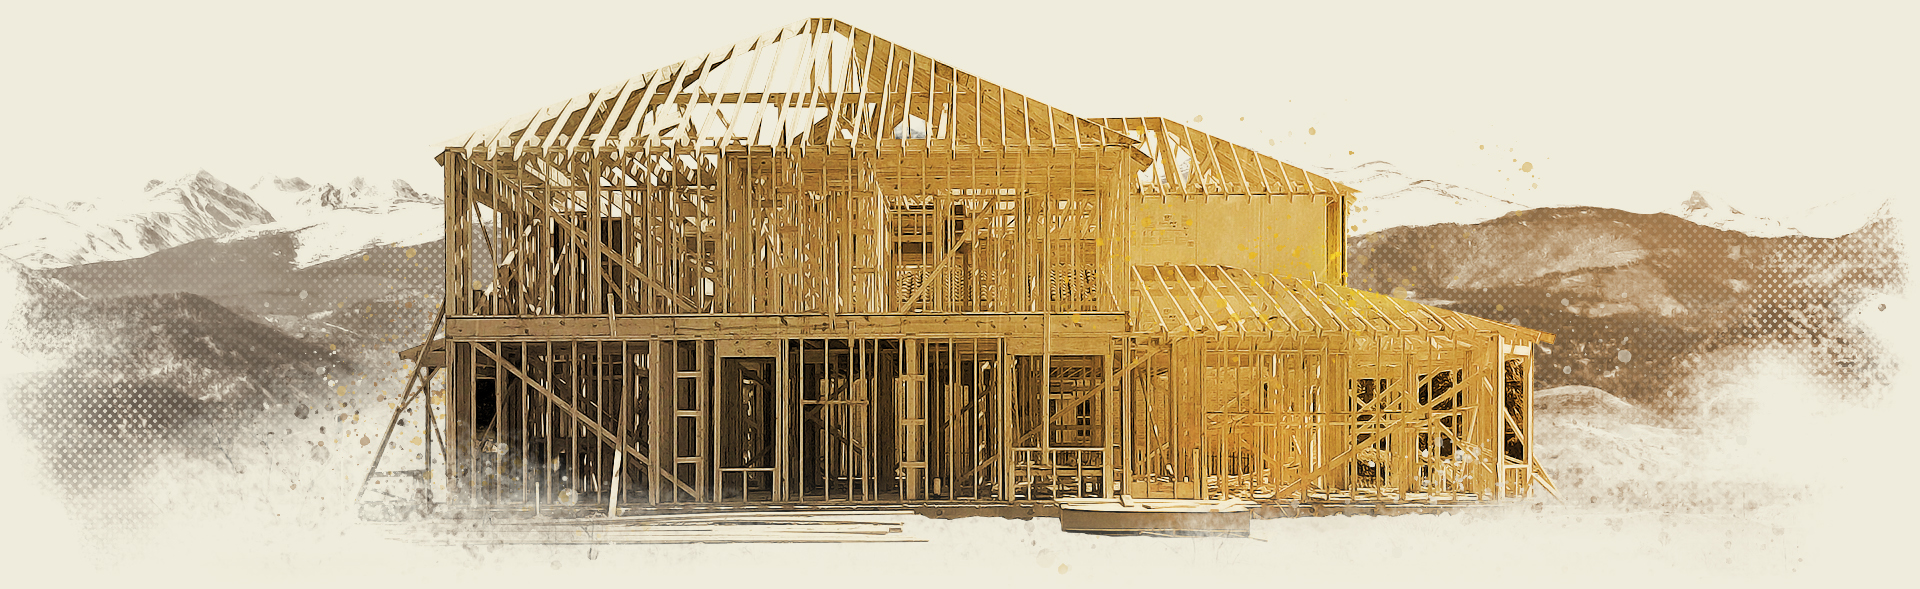 Wooden frame of a house under construction with mountainous background.